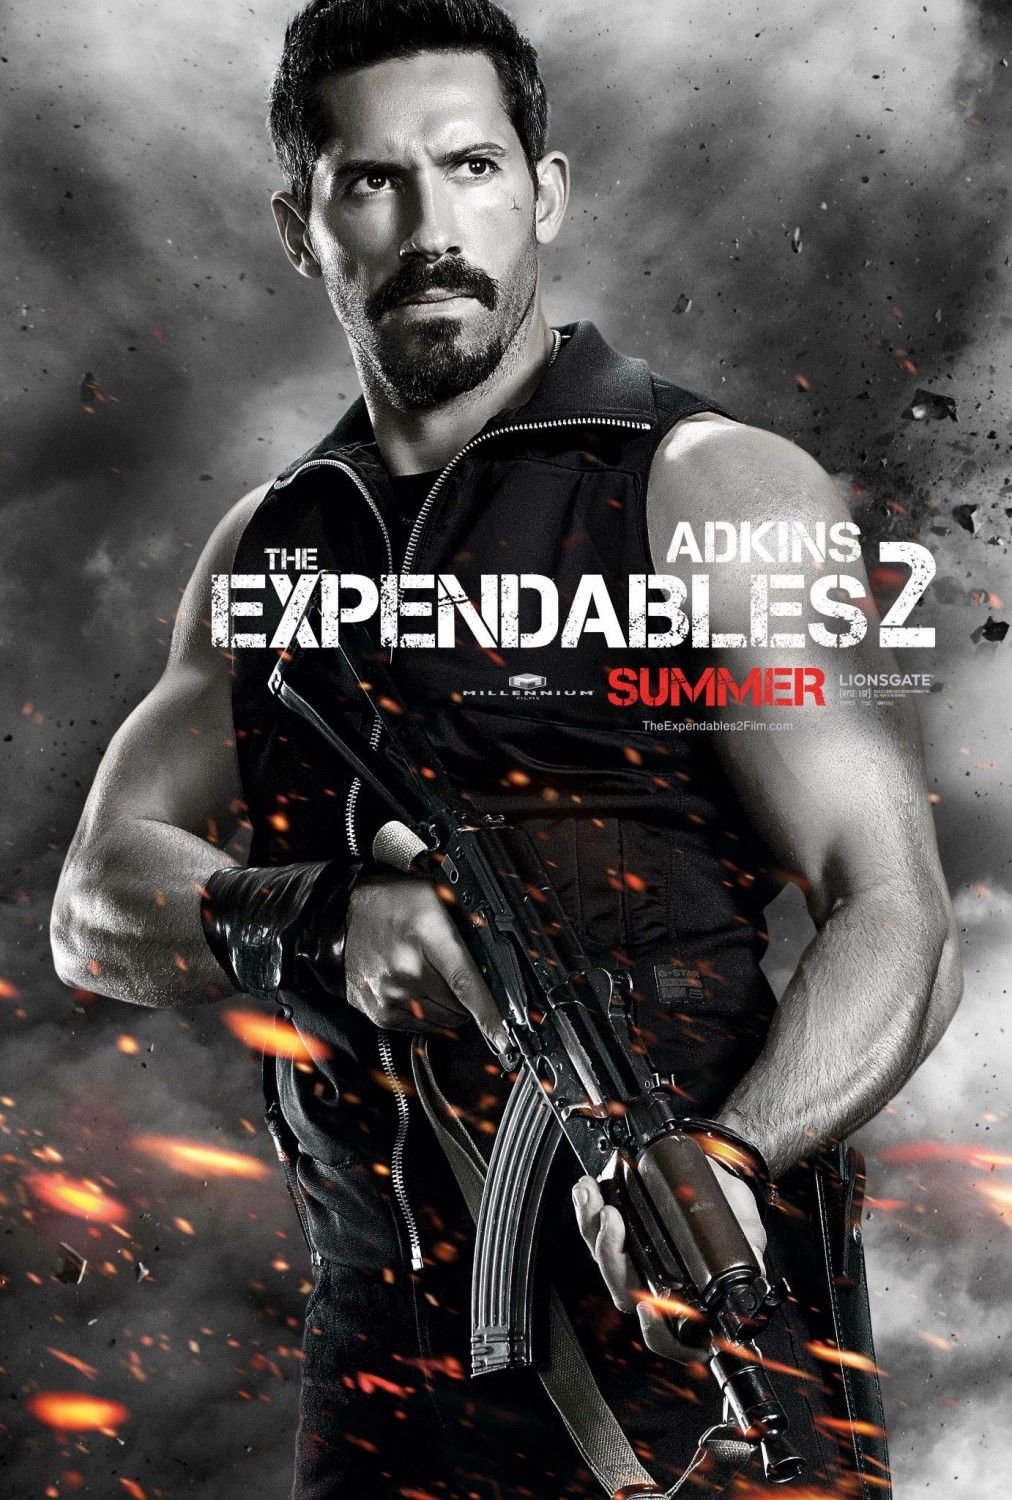 The Expendables 2 Scott Adkins Character Poster